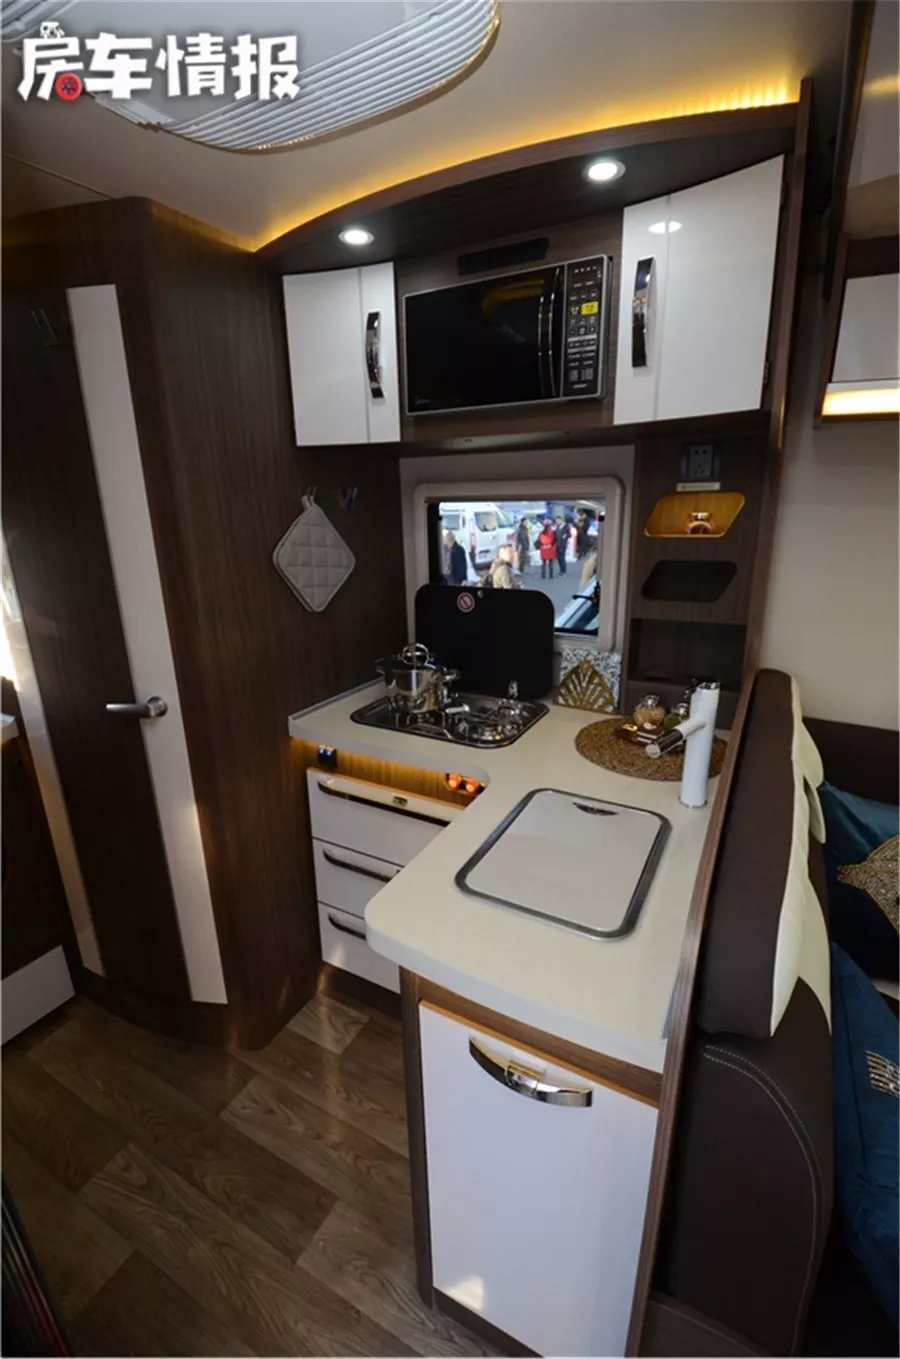 This C-type RV Ford chassis creates a reception area for 7 people, and the small forehead design is also convenient for urban commuting